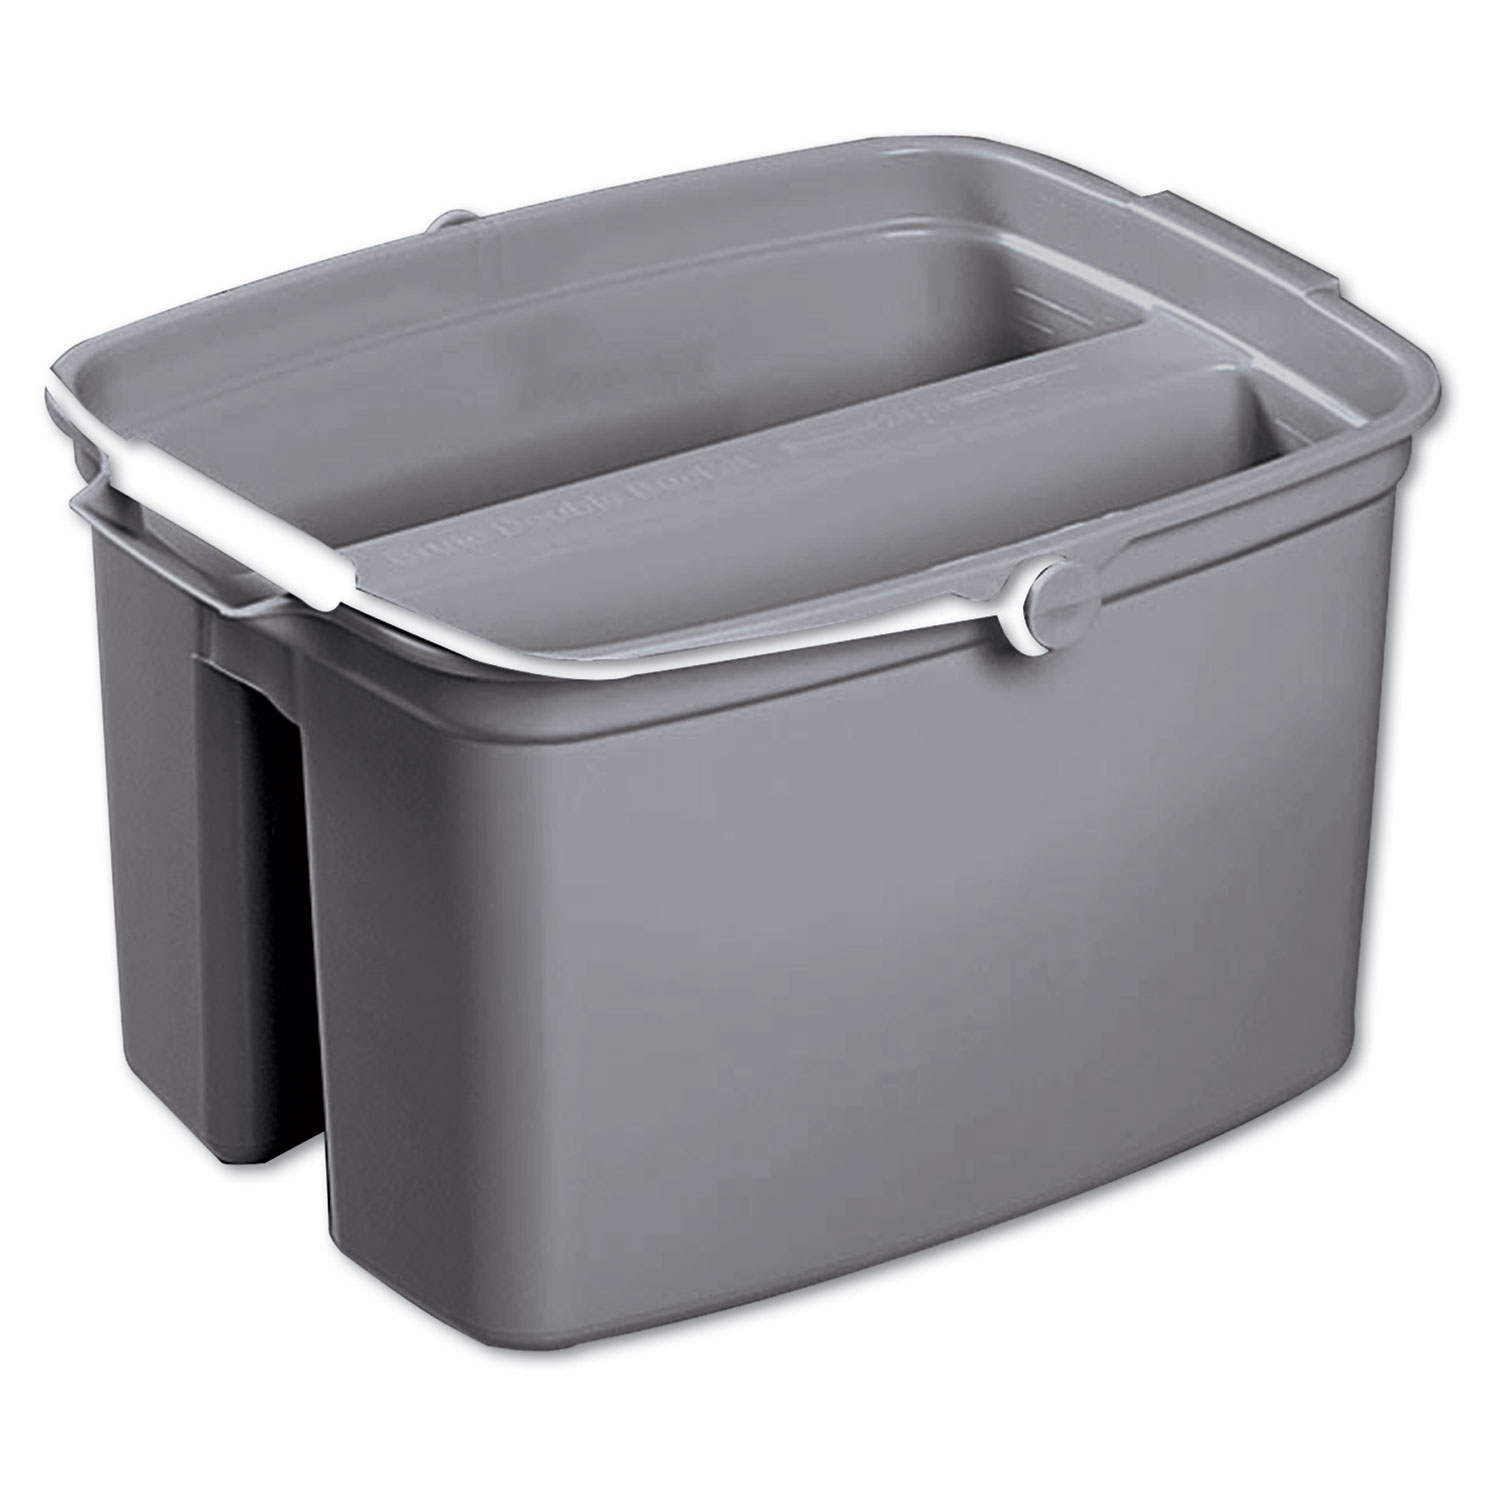  Rubbermaid Commercial 261700GRAY Double Utility Pail, 17qt, Gray (RCP2617GRA) 